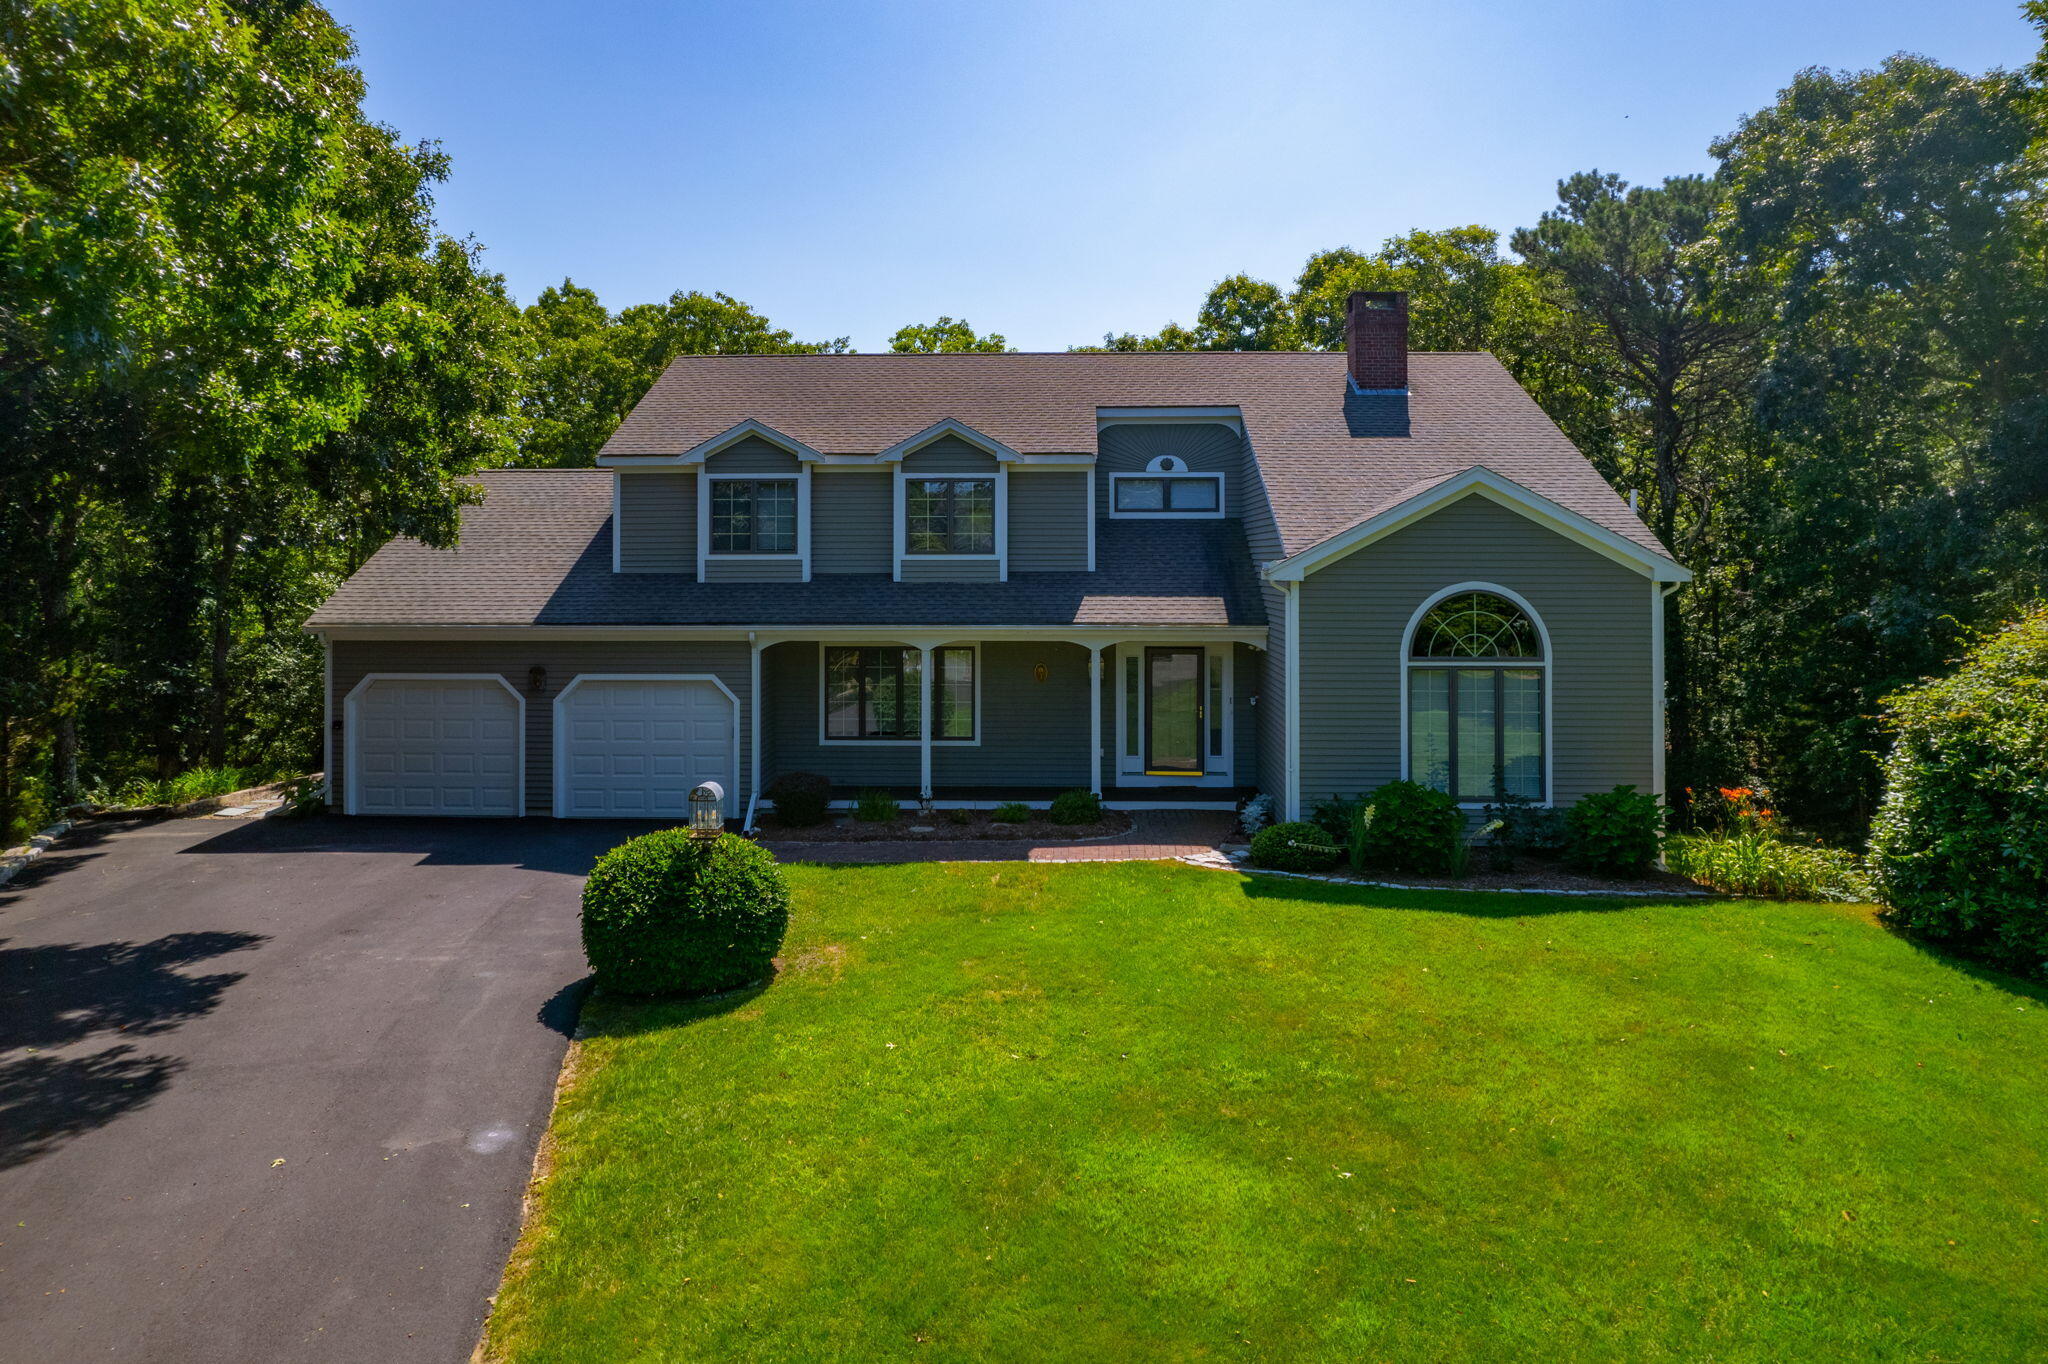 1 Punch Bowl Drive, Falmouth, Massachusetts 02540, 5 Bedrooms Bedrooms, 8 Rooms Rooms,3 BathroomsBathrooms,Residential,For Sale,1 Punch Bowl Drive,22401799